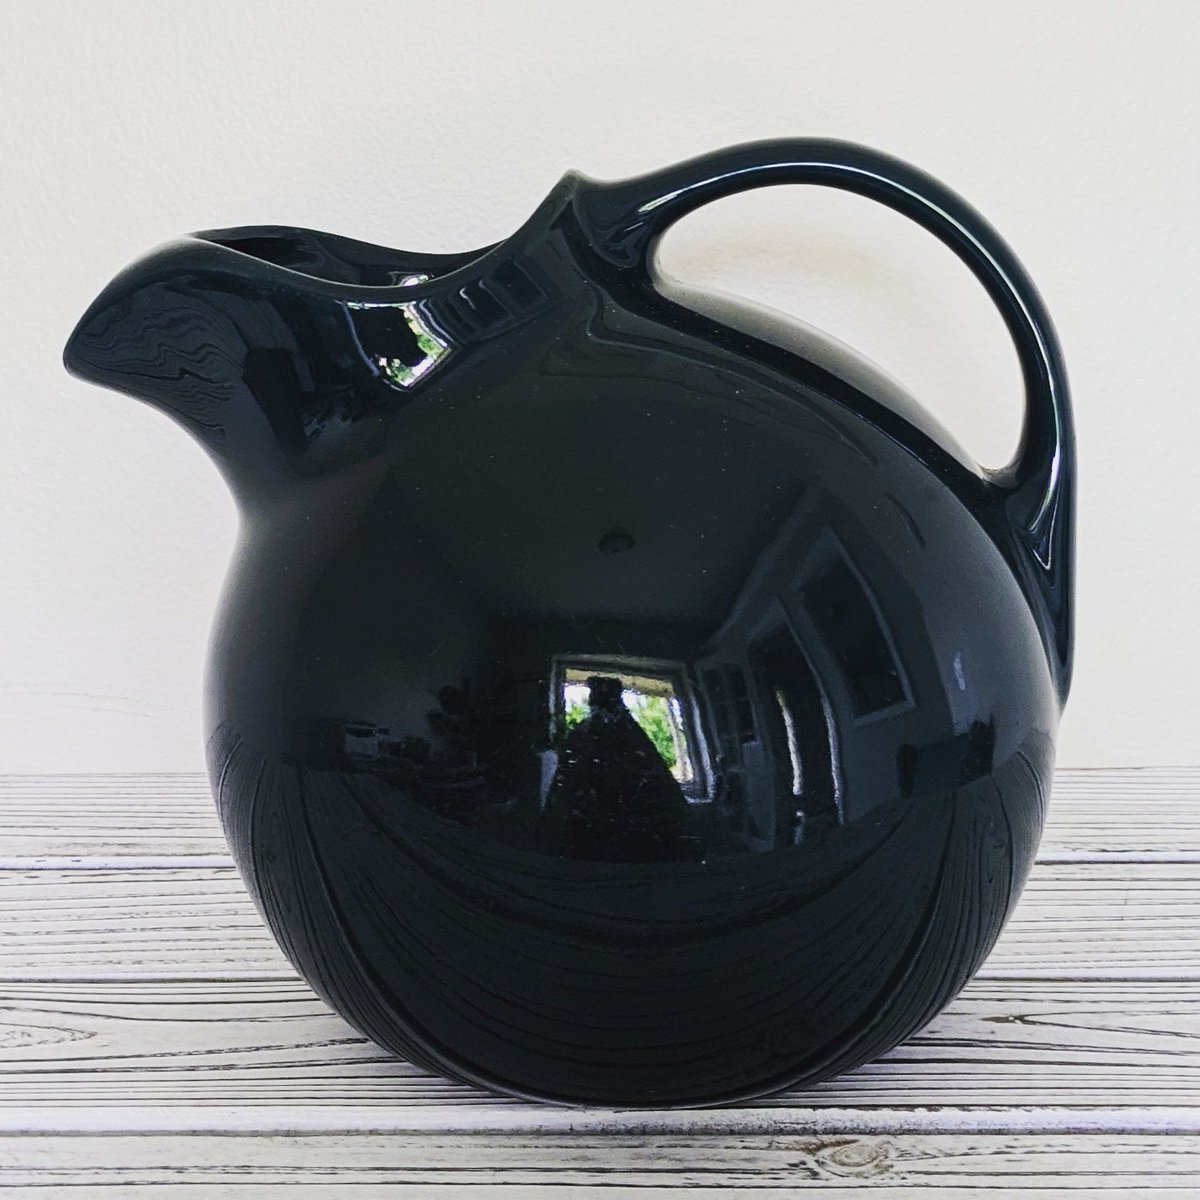 Available now! 1940s Hall Pottery ball pitcher with ice lip in deep teal. Link in bio. #vintage #vintageetsy #hallpottery #ballpitcher #hallpotterypitcher #teal #midcentury #pitcher #vintagepottery